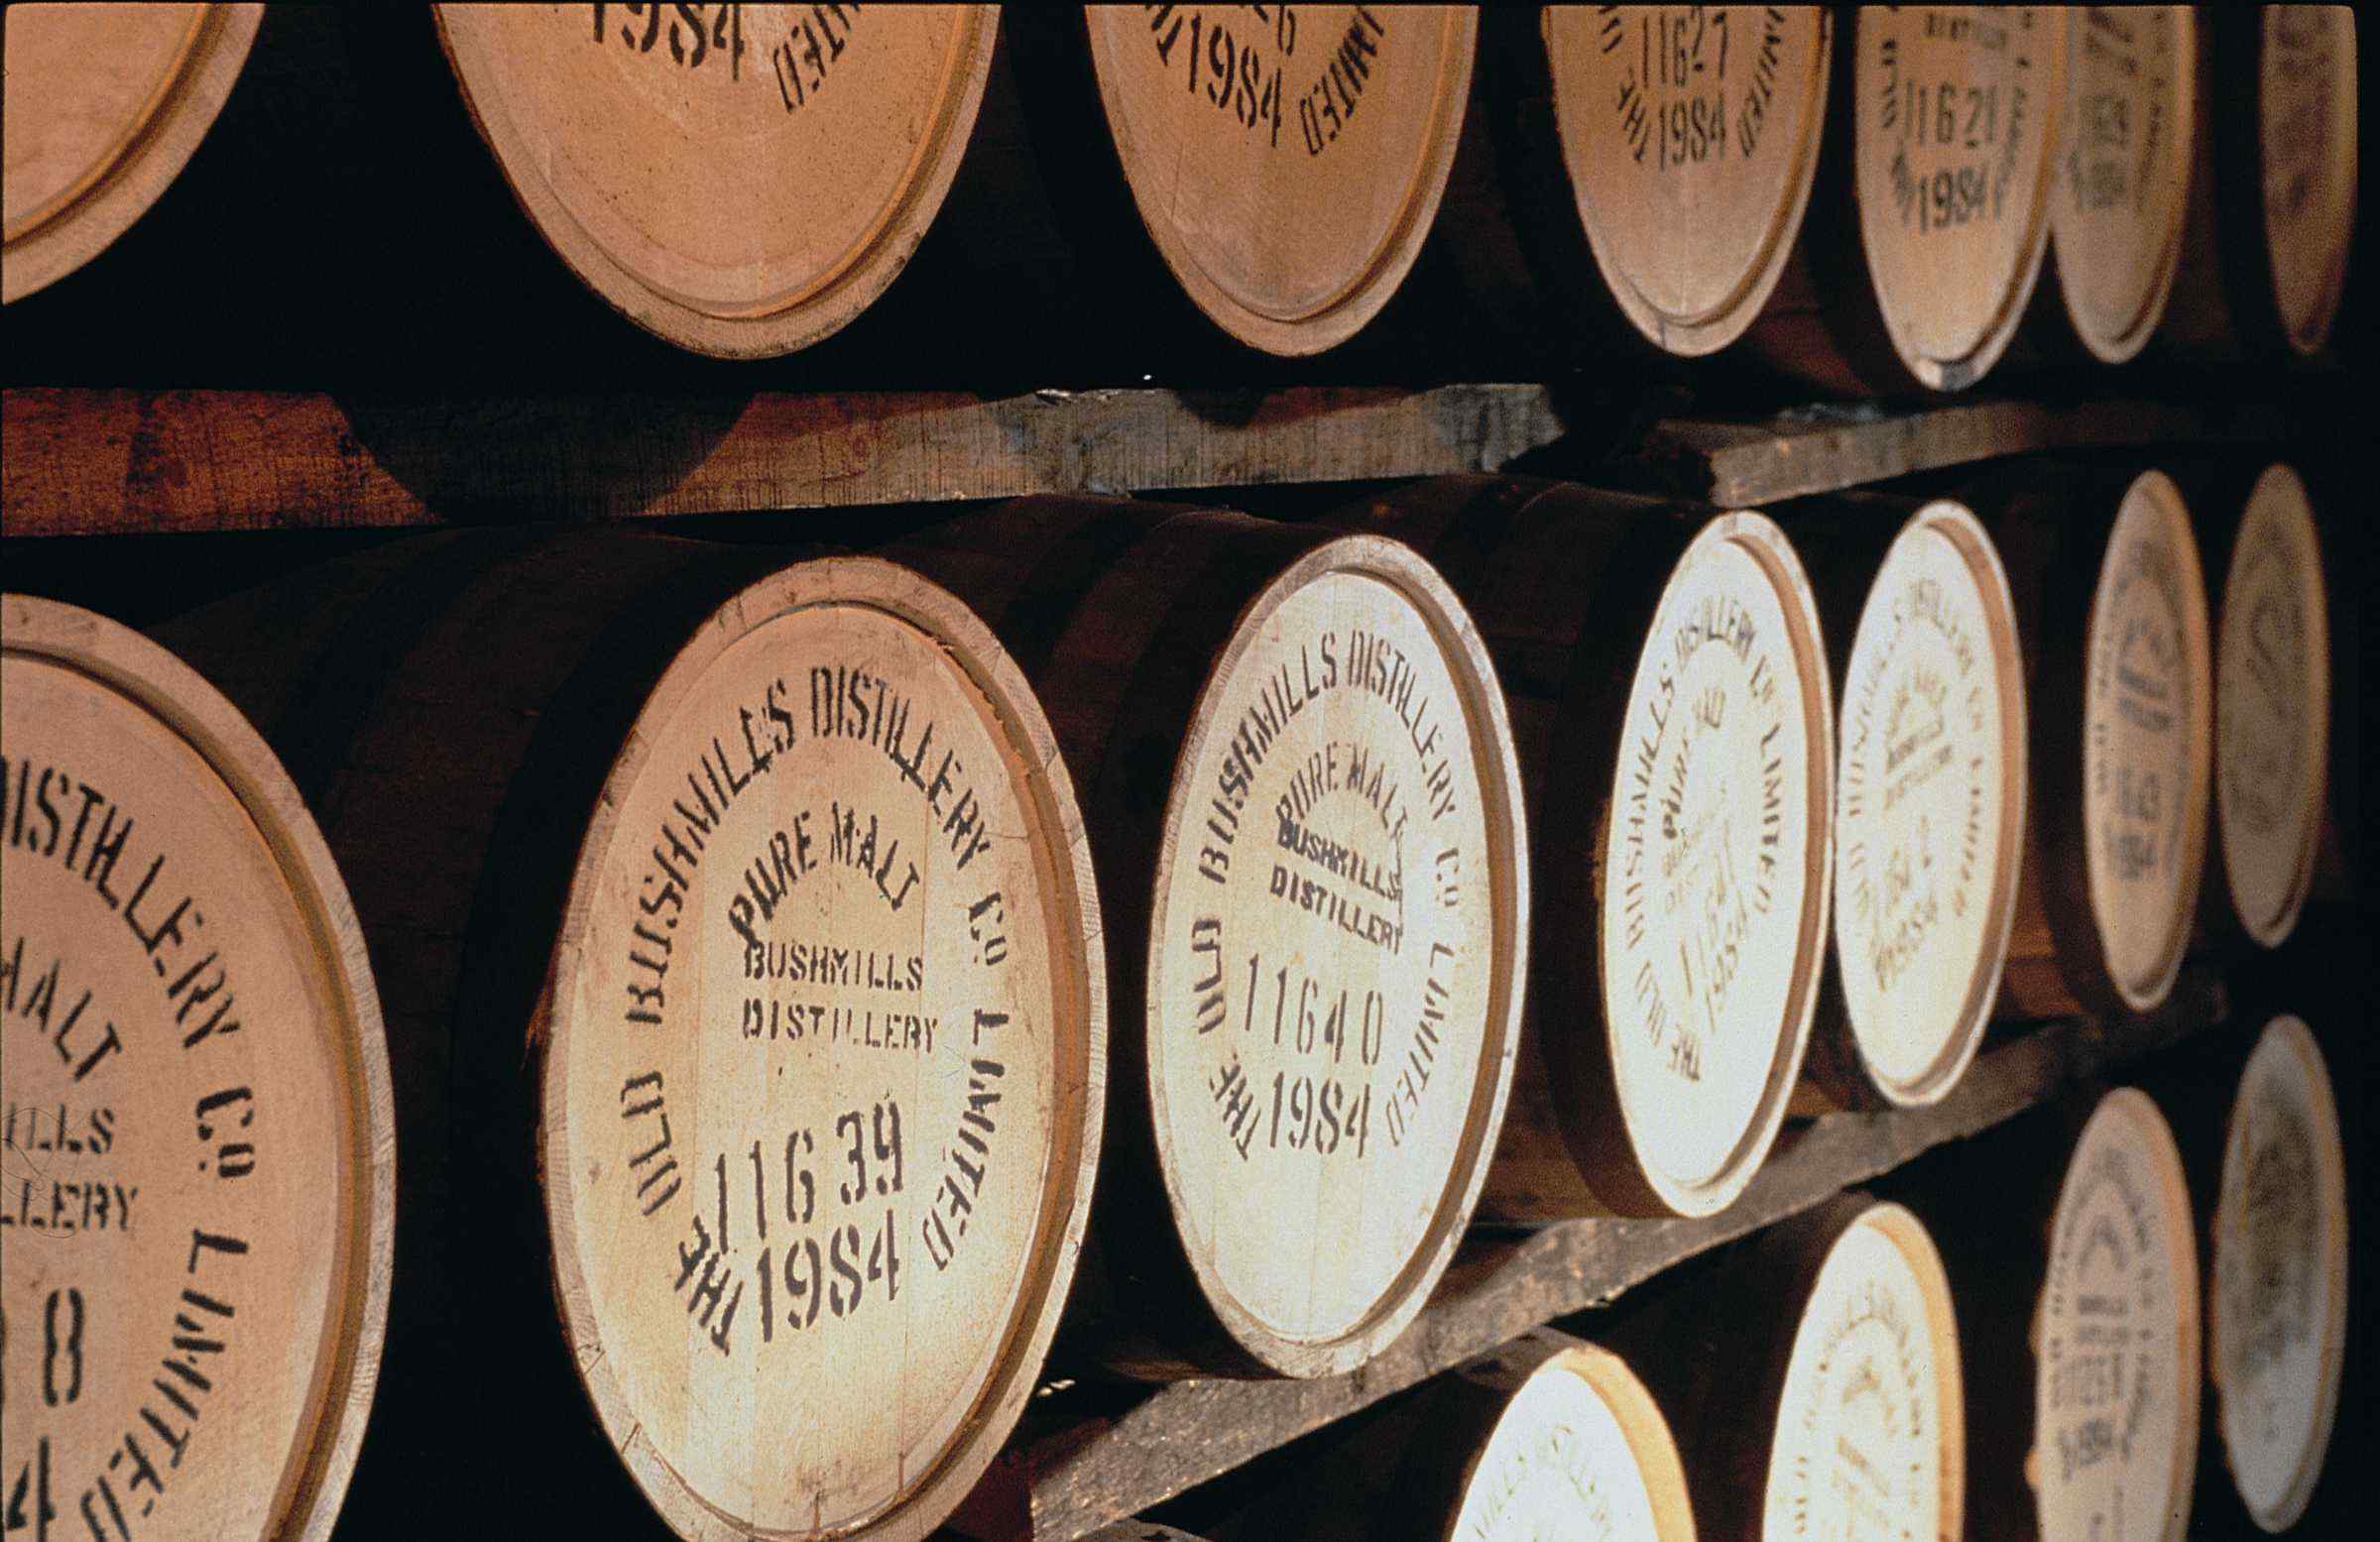 KNOW YOUR WHISKEY: THE DIFFERENCE BETWEEN BOURBON, SCOTCH, RYE